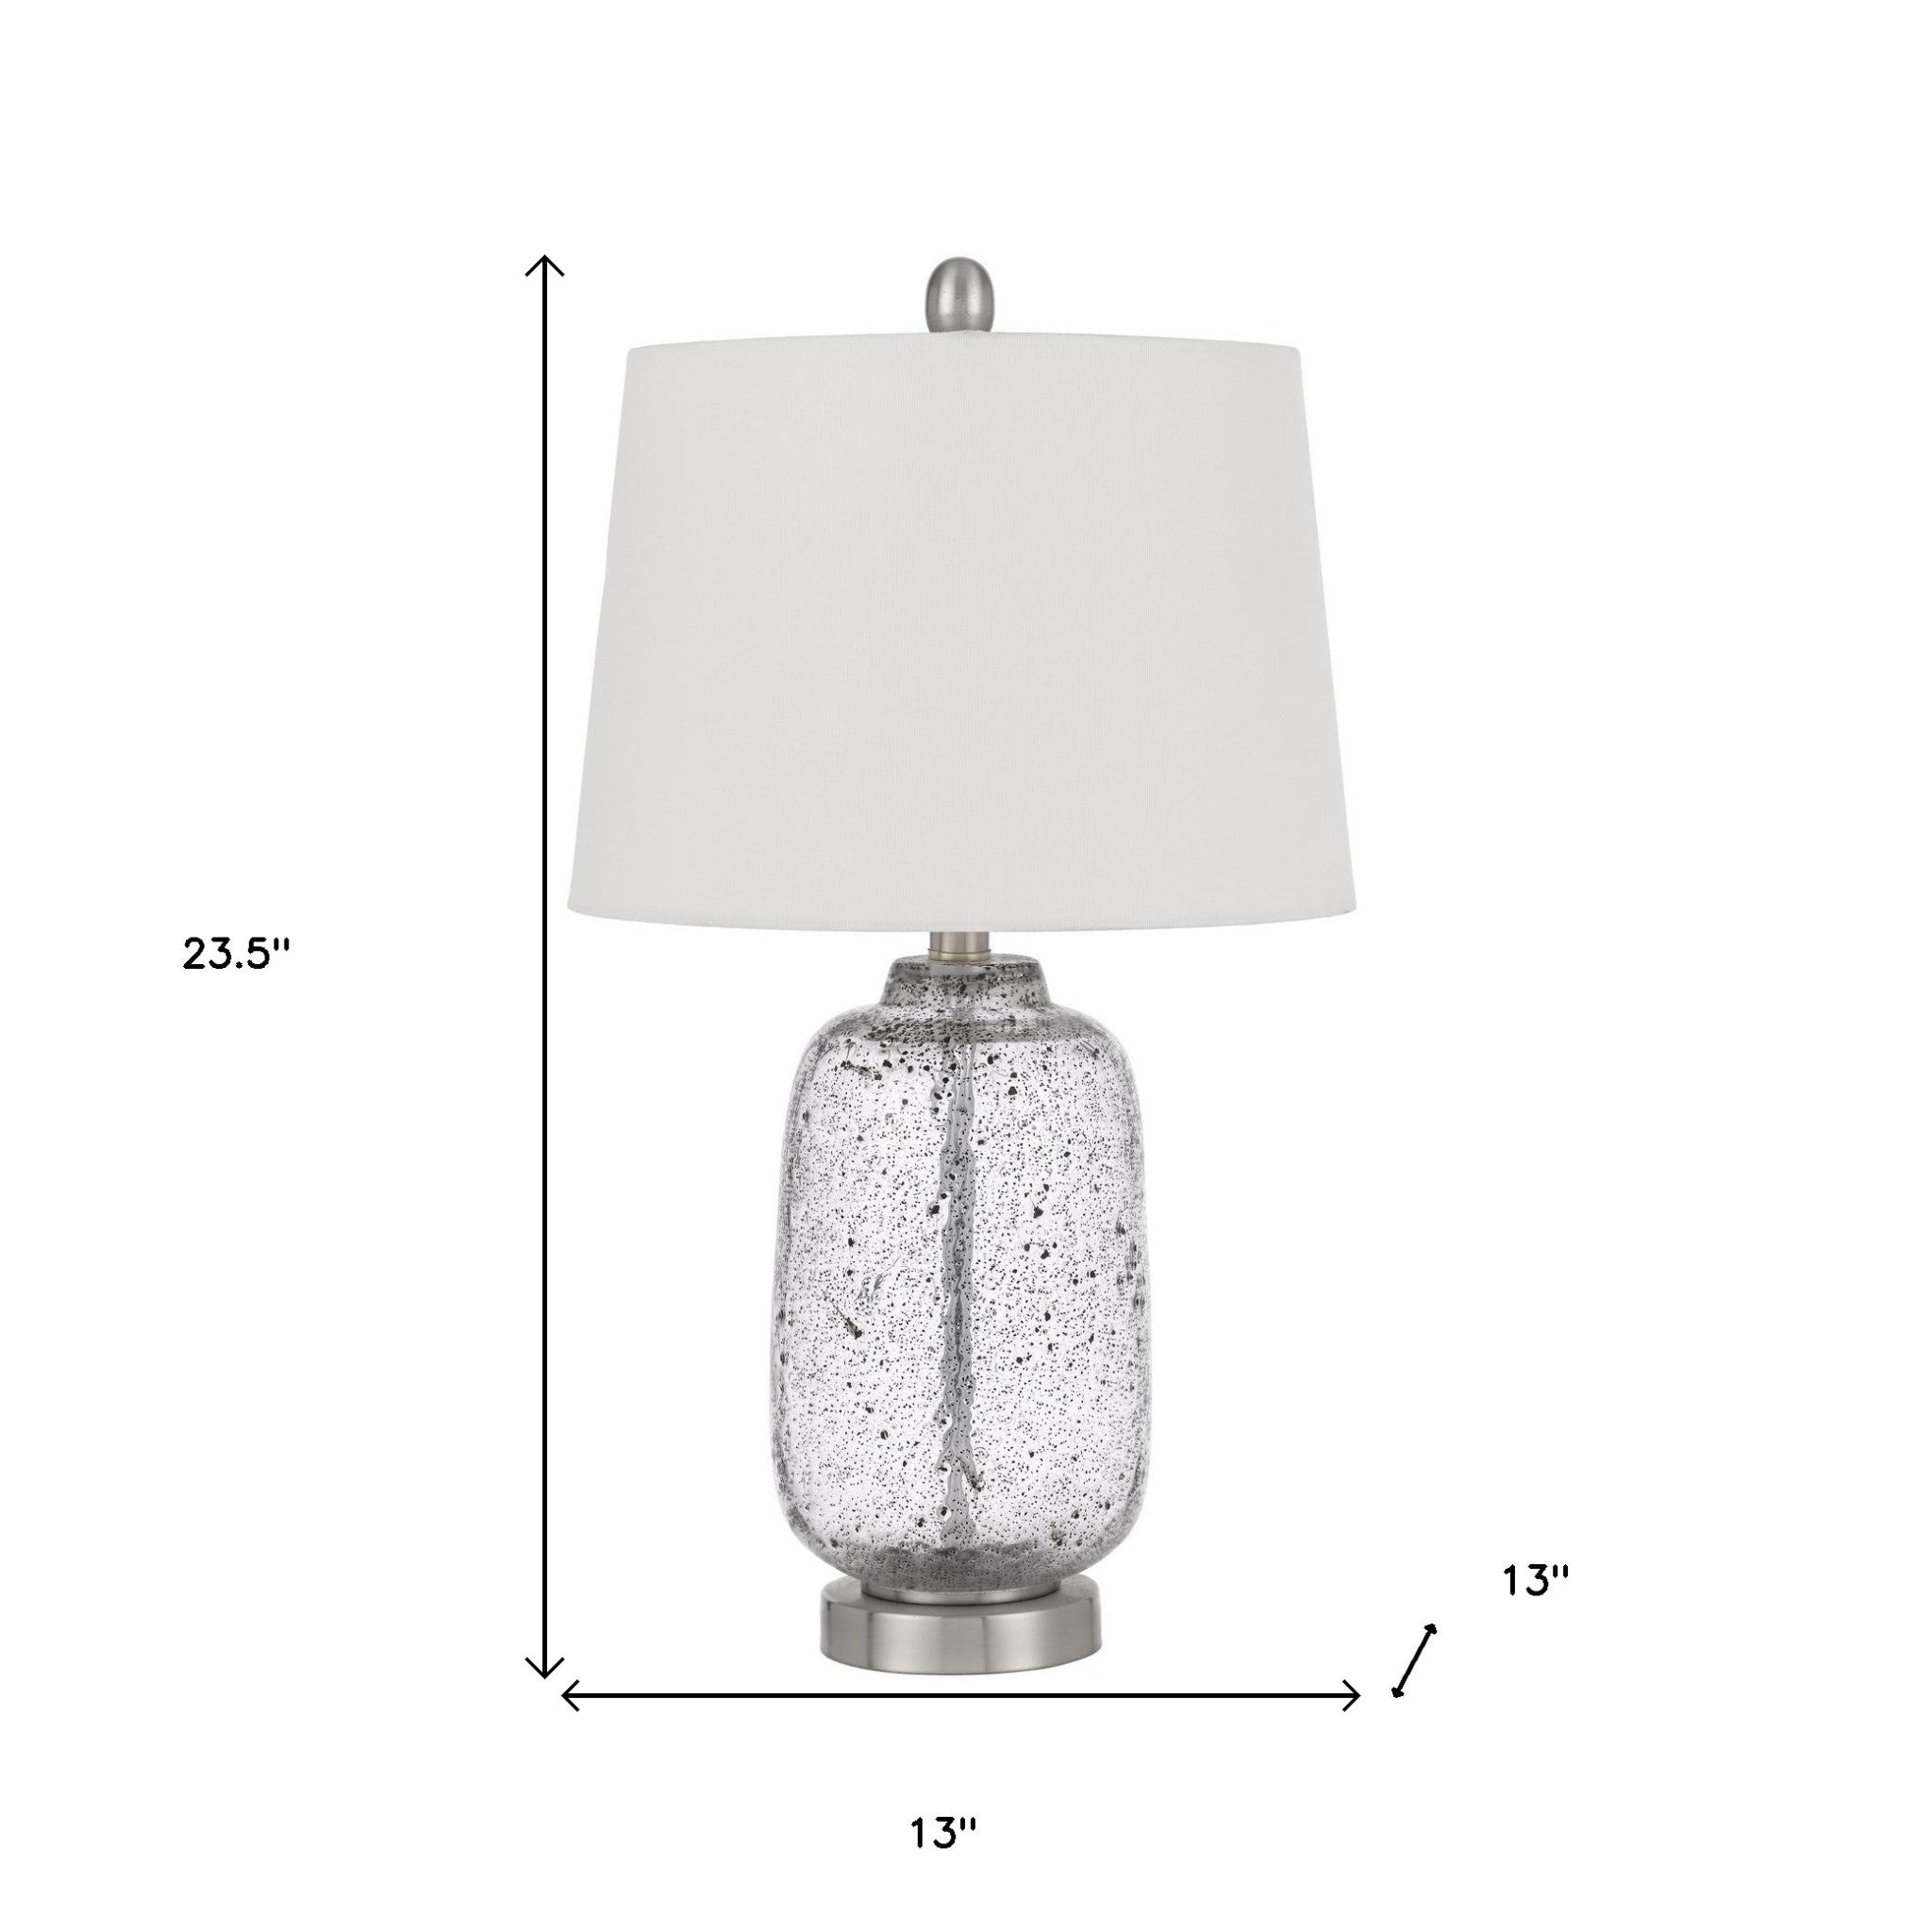 24" Nickel Metal Table Lamp With White Empire Shade